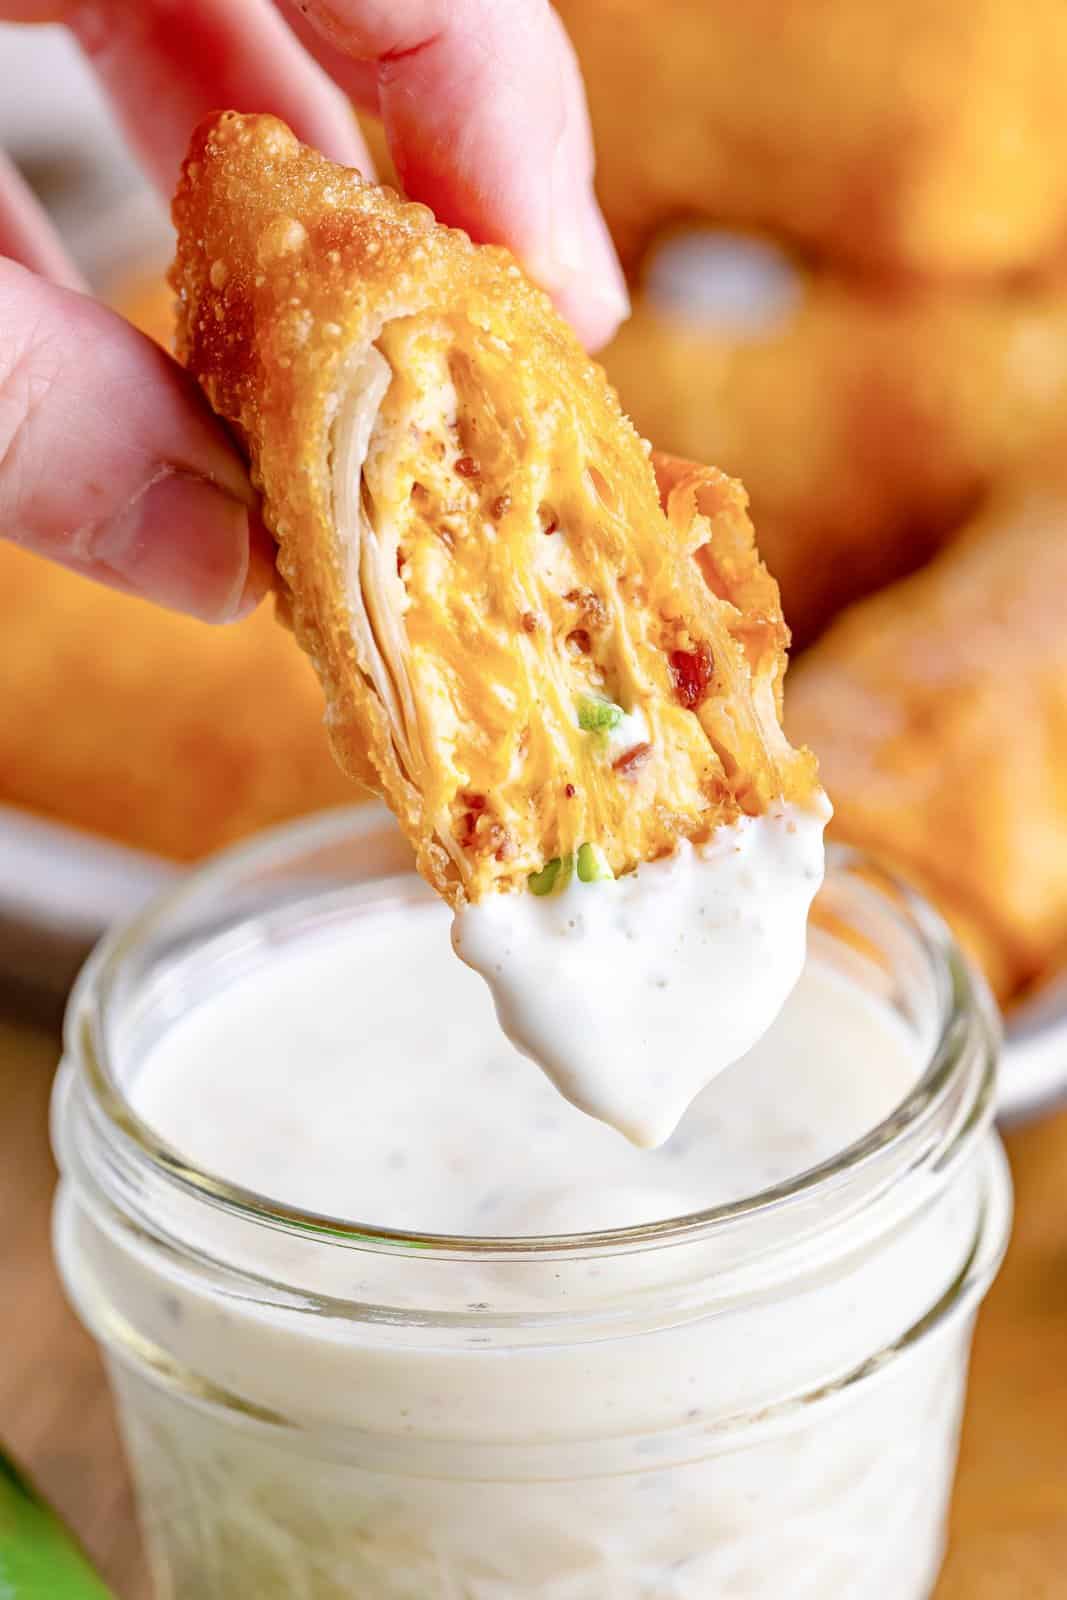 A jalapeno popper egg roll dipped in ranch sauce.